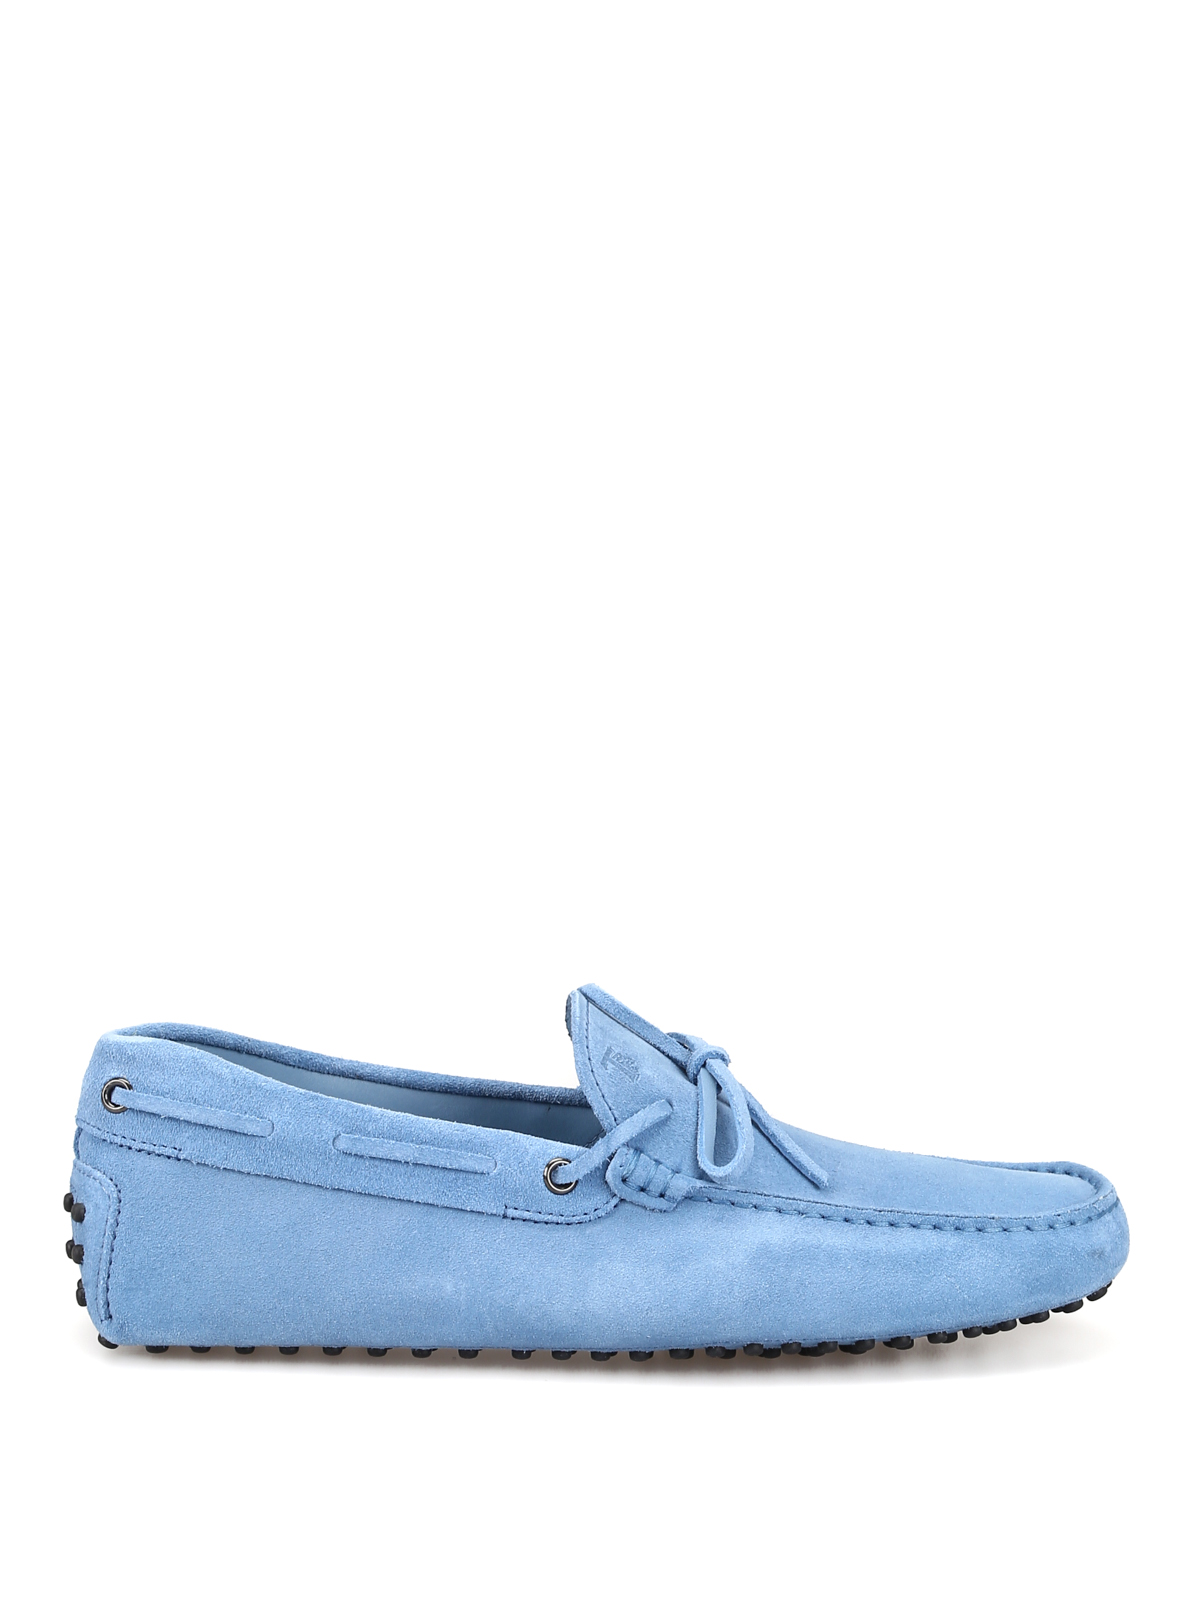 tod's blue suede loafers